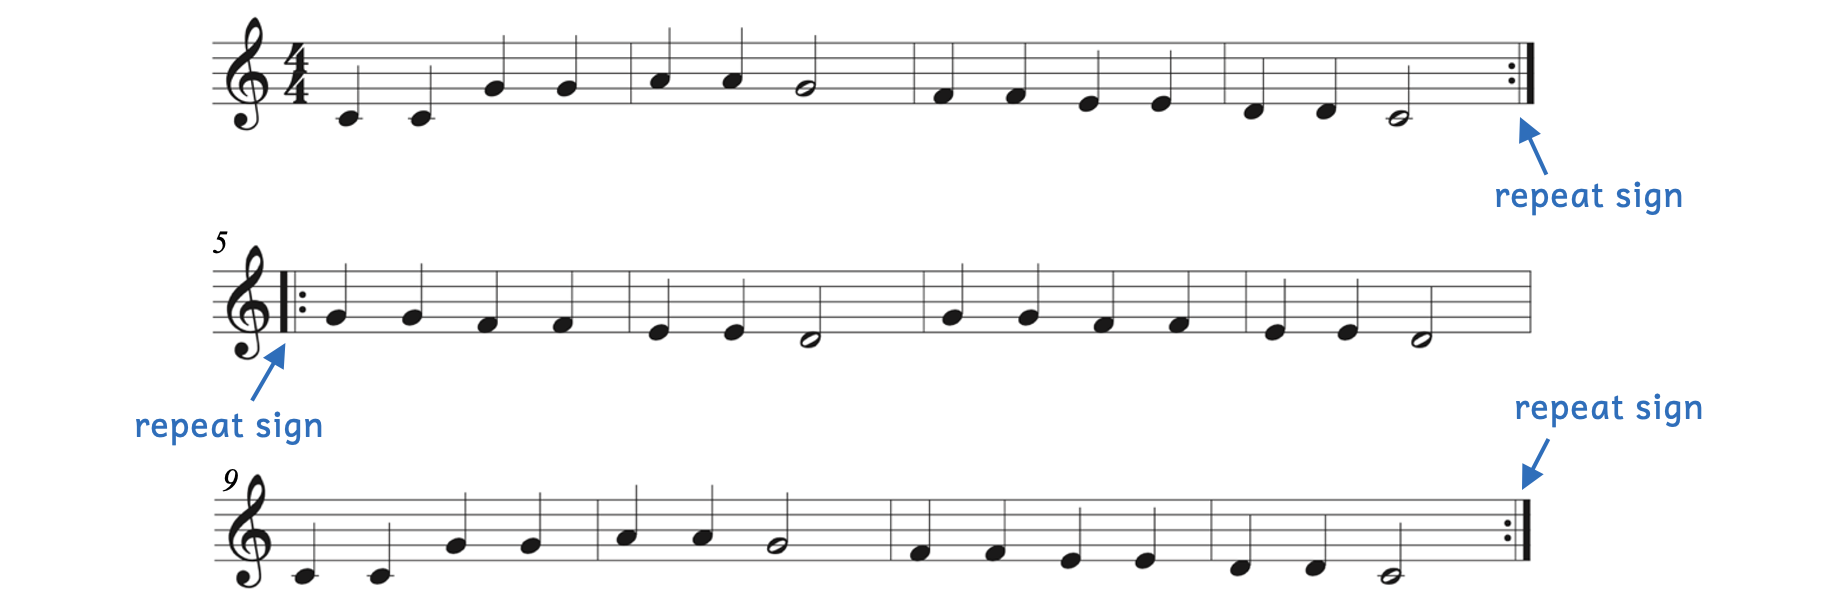 Twinkle Twinkle Little Star with end-repeat signs at measure 4, start-repeat signs at measure 5, and end-repeat signs at measure 12.